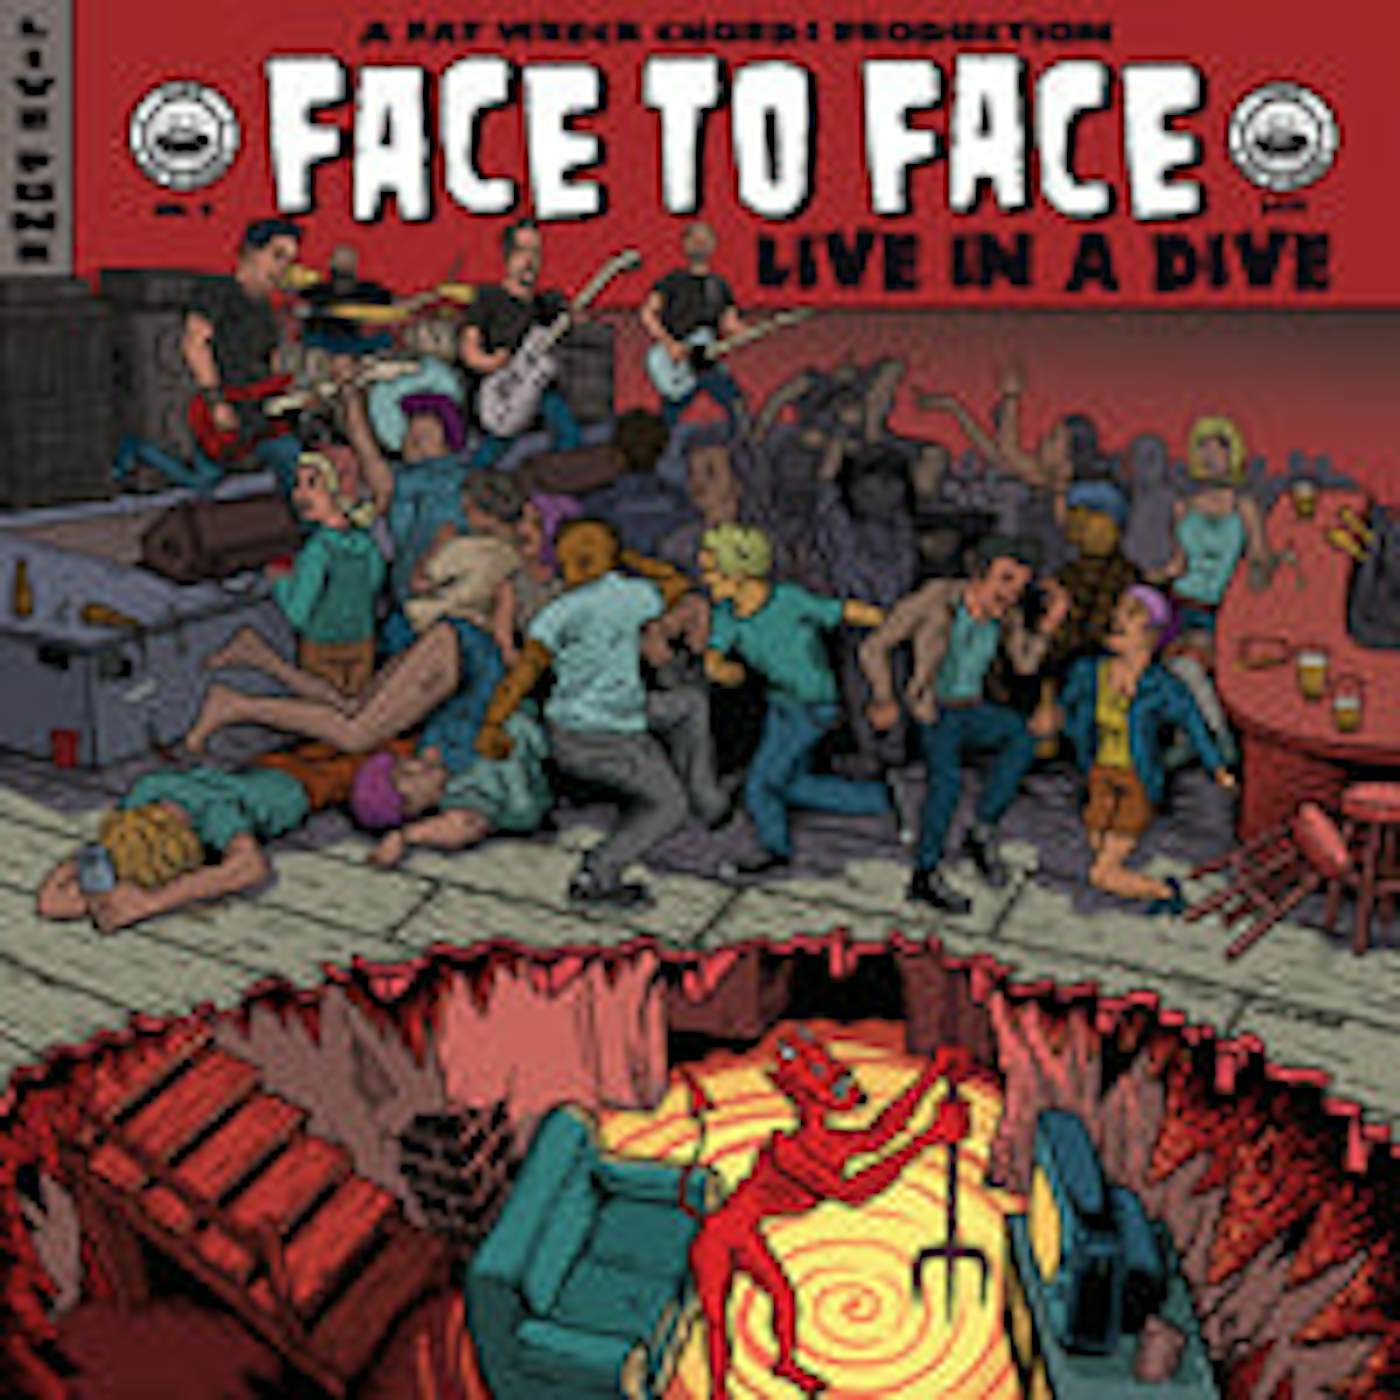 Face To Face LP - Live In A Dive (Vinyl)